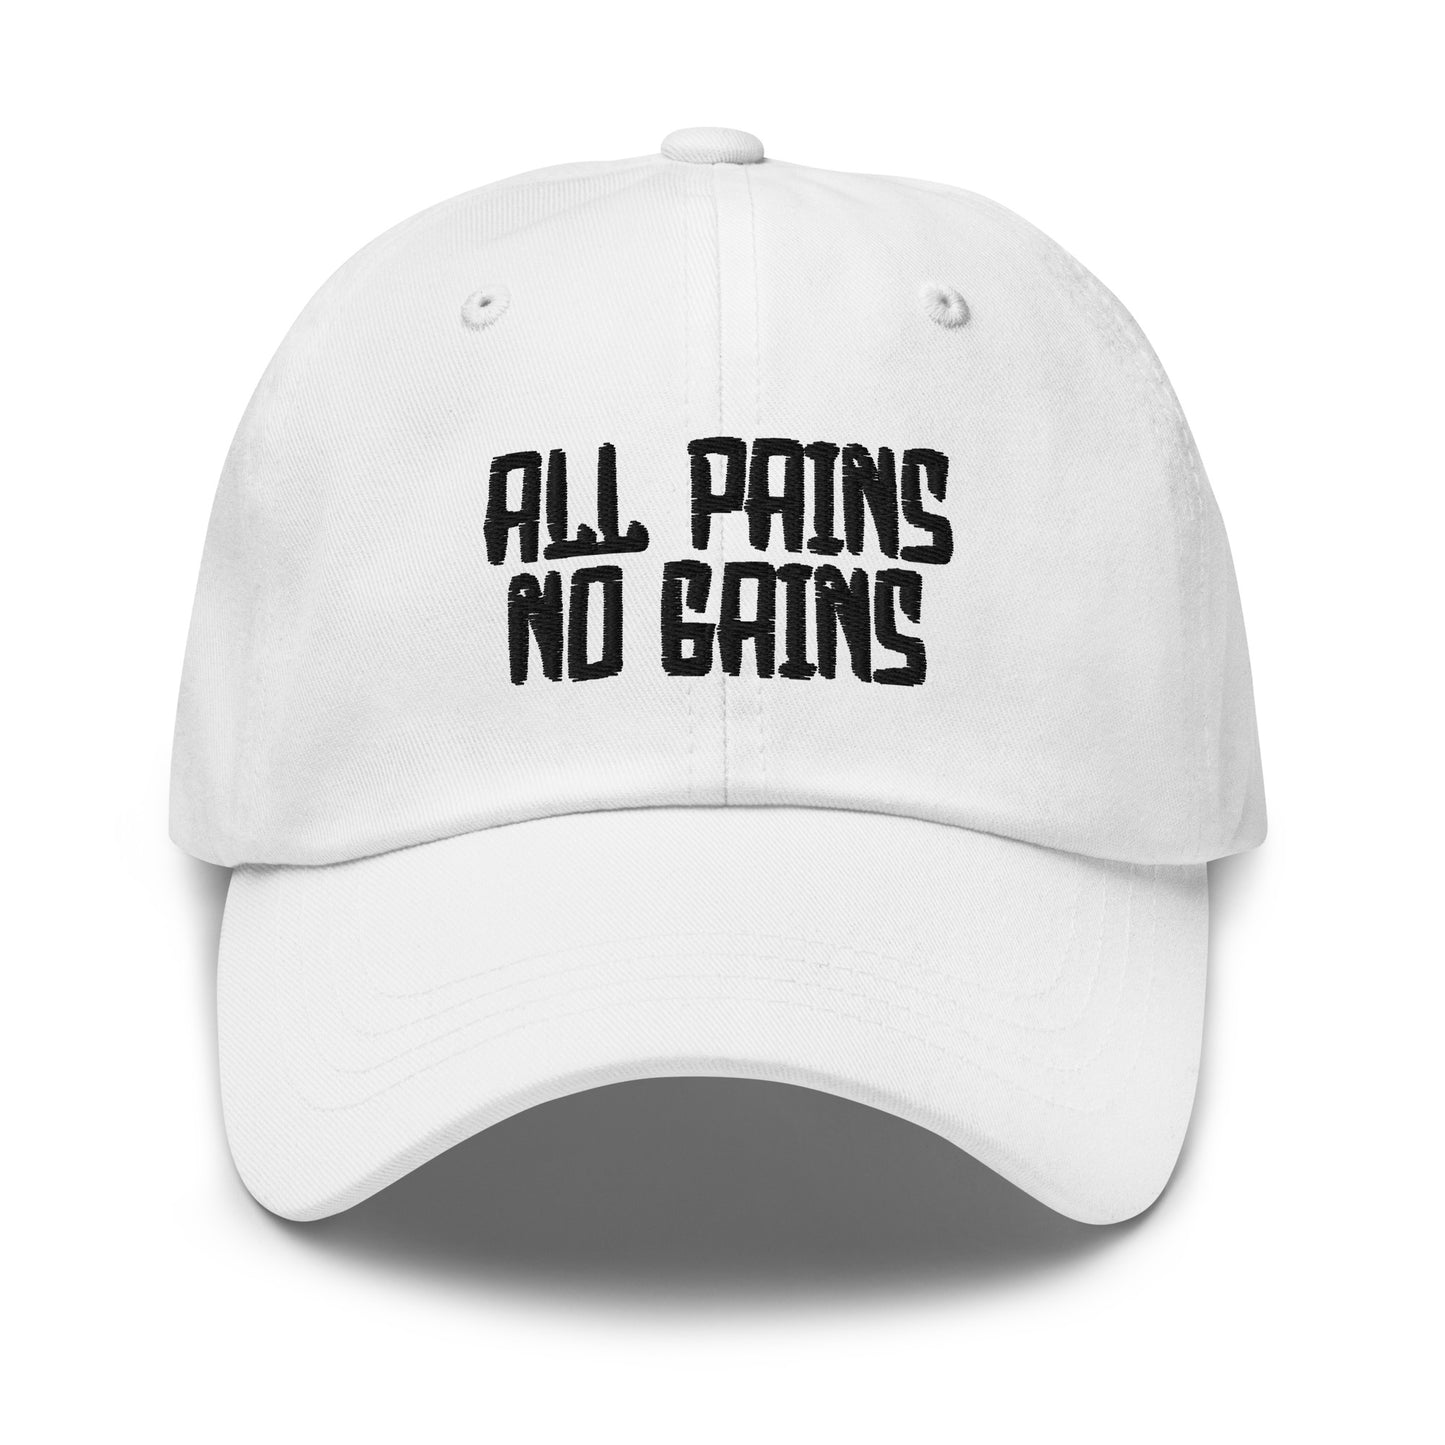 All Pains No Gains hat